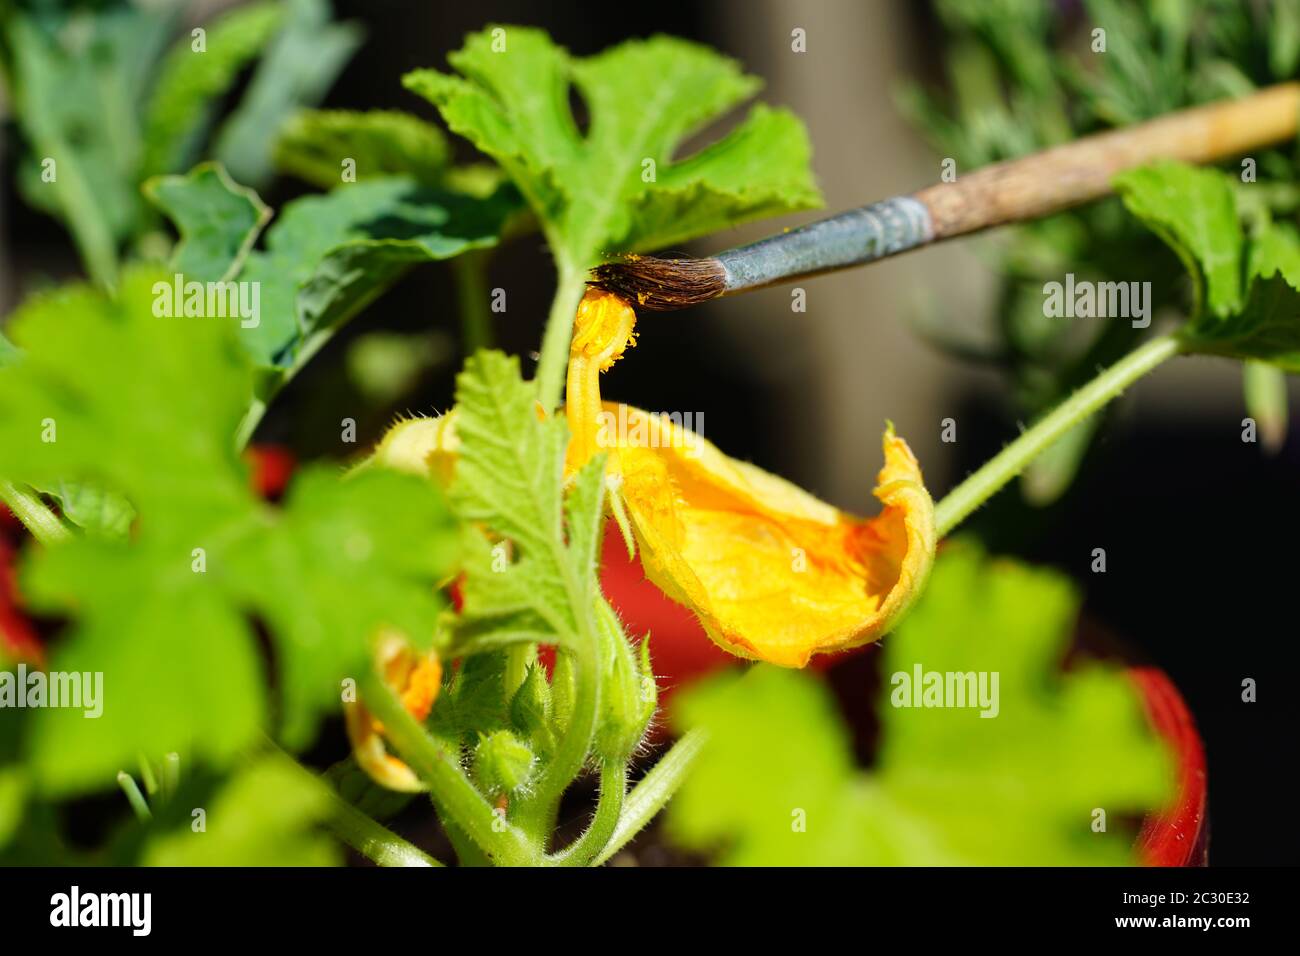 Hand pollinating zucchini flowers with a paint brush Stock Photo